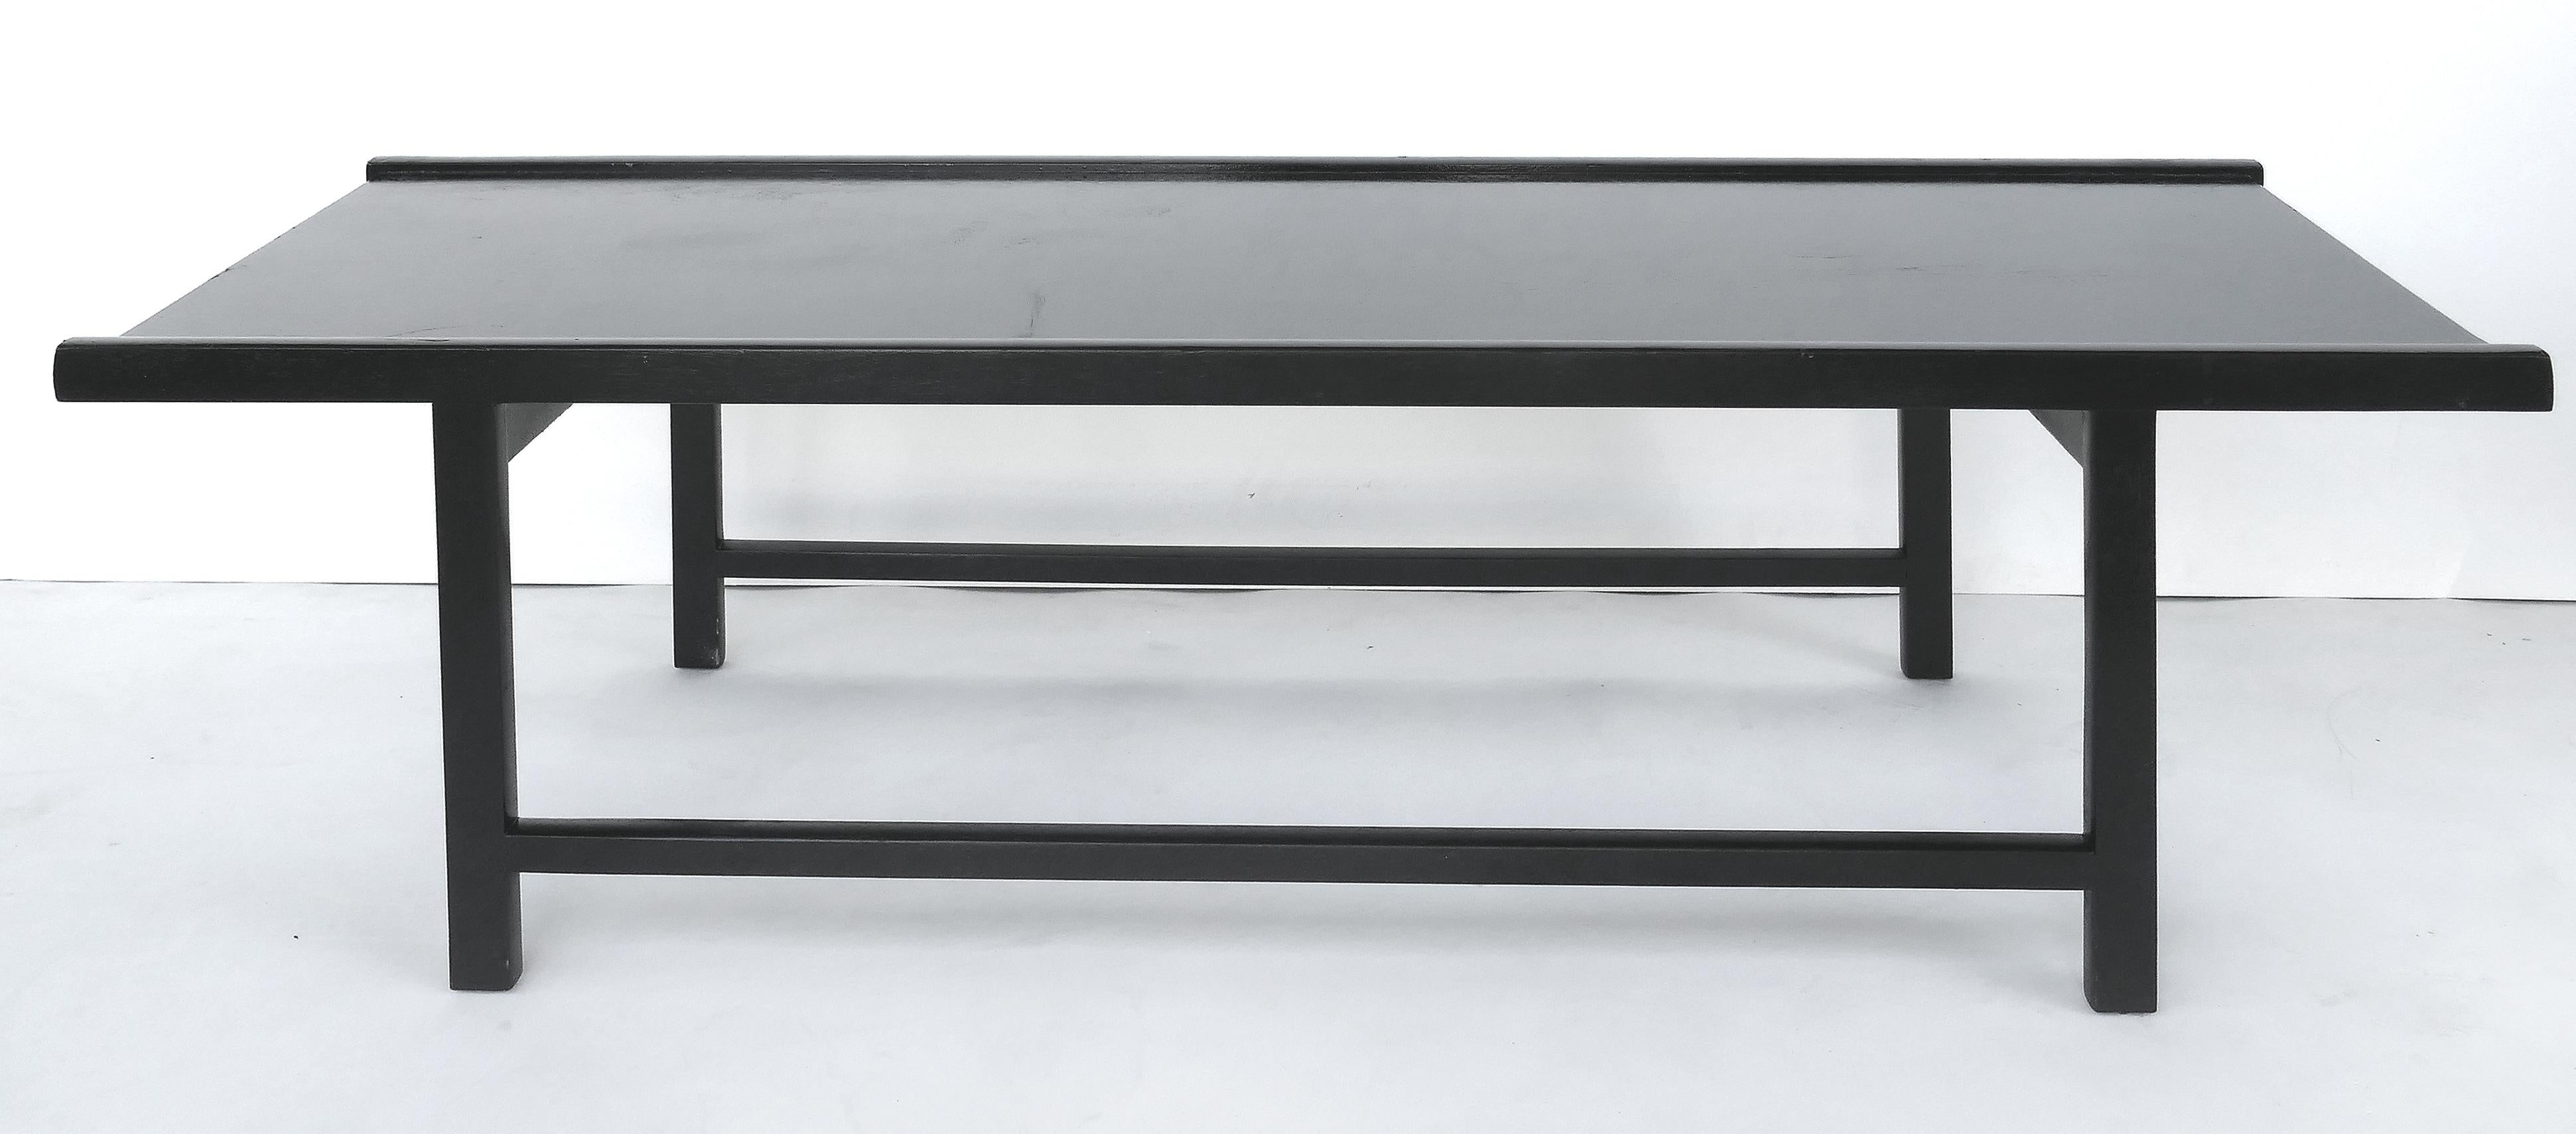 Erwin-Lambeth midcentury ebonized coffee table

Offered for sale is an Erwin-Lambeth ebonized wood coffee table. This Minimalist Mid-Century Modern table has an ebonized finish that shows the subtle grain of the wood. The original affixed label is